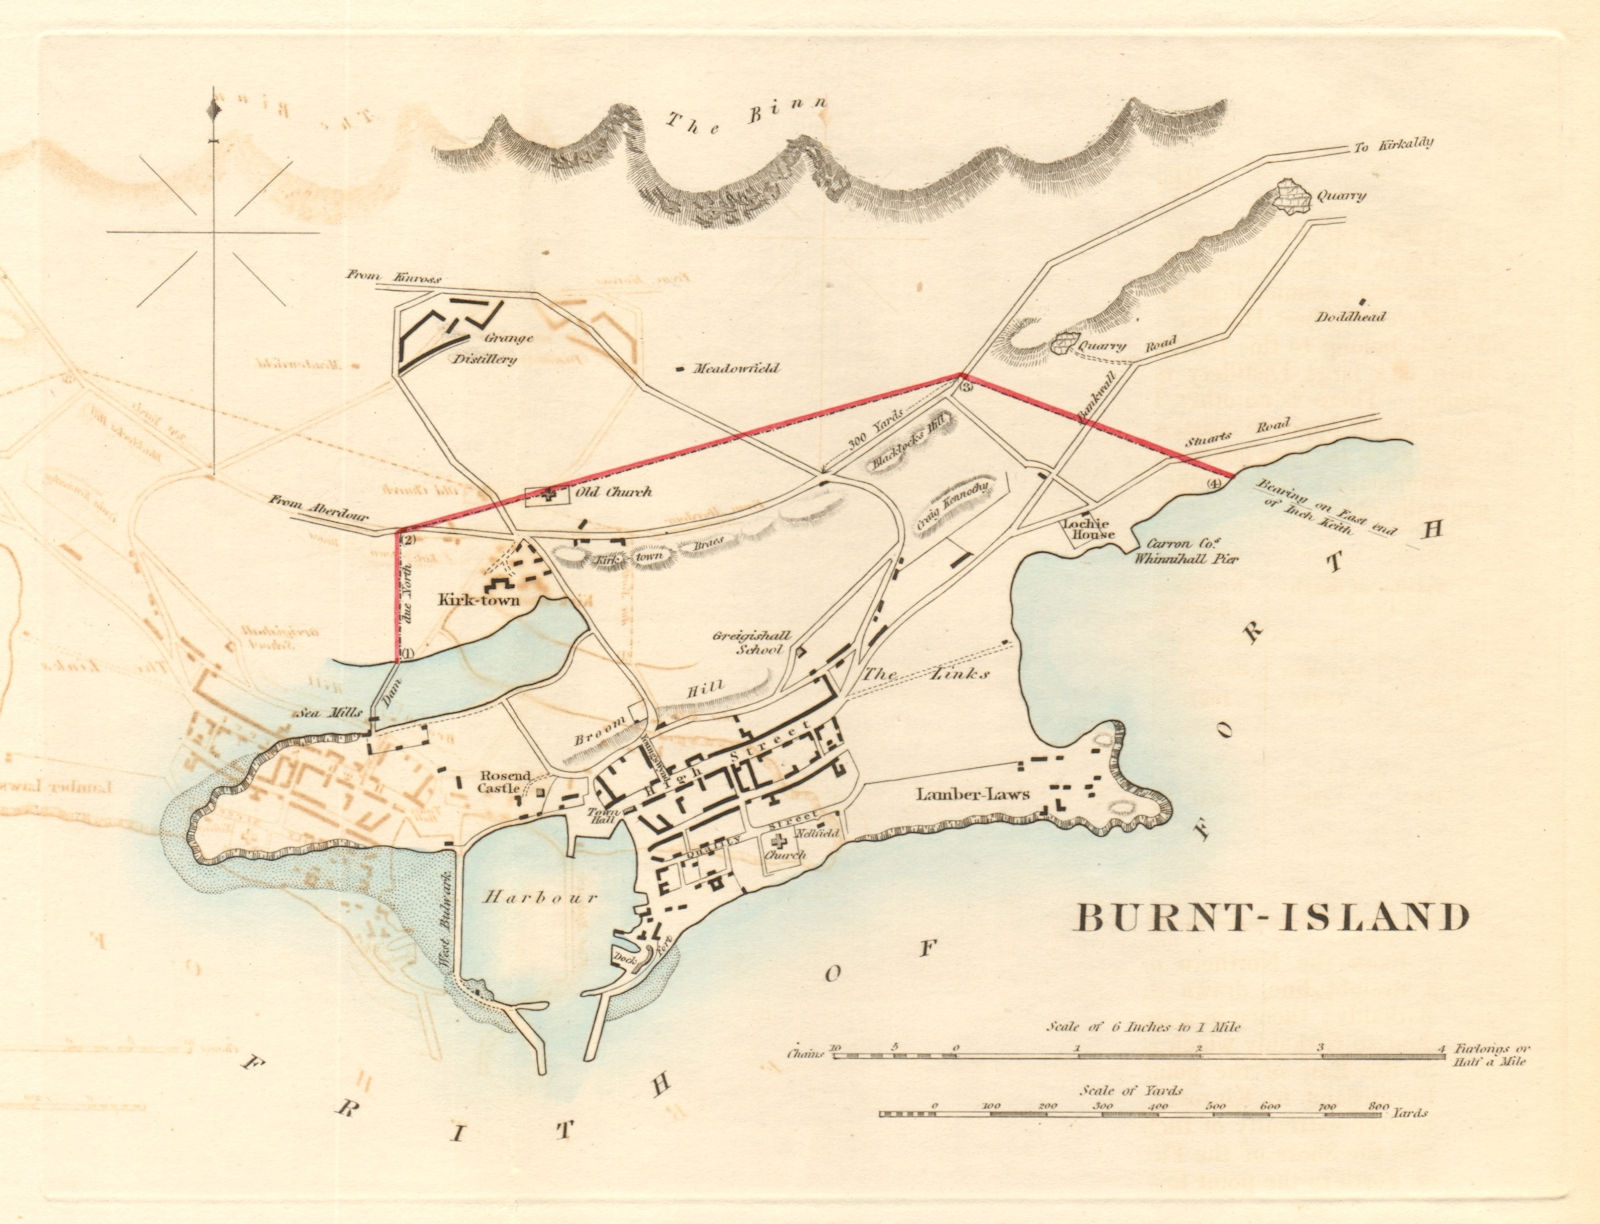 Associate Product BURNTISLAND borough/town plan for the REFORM ACT. Scotland 1832 old map